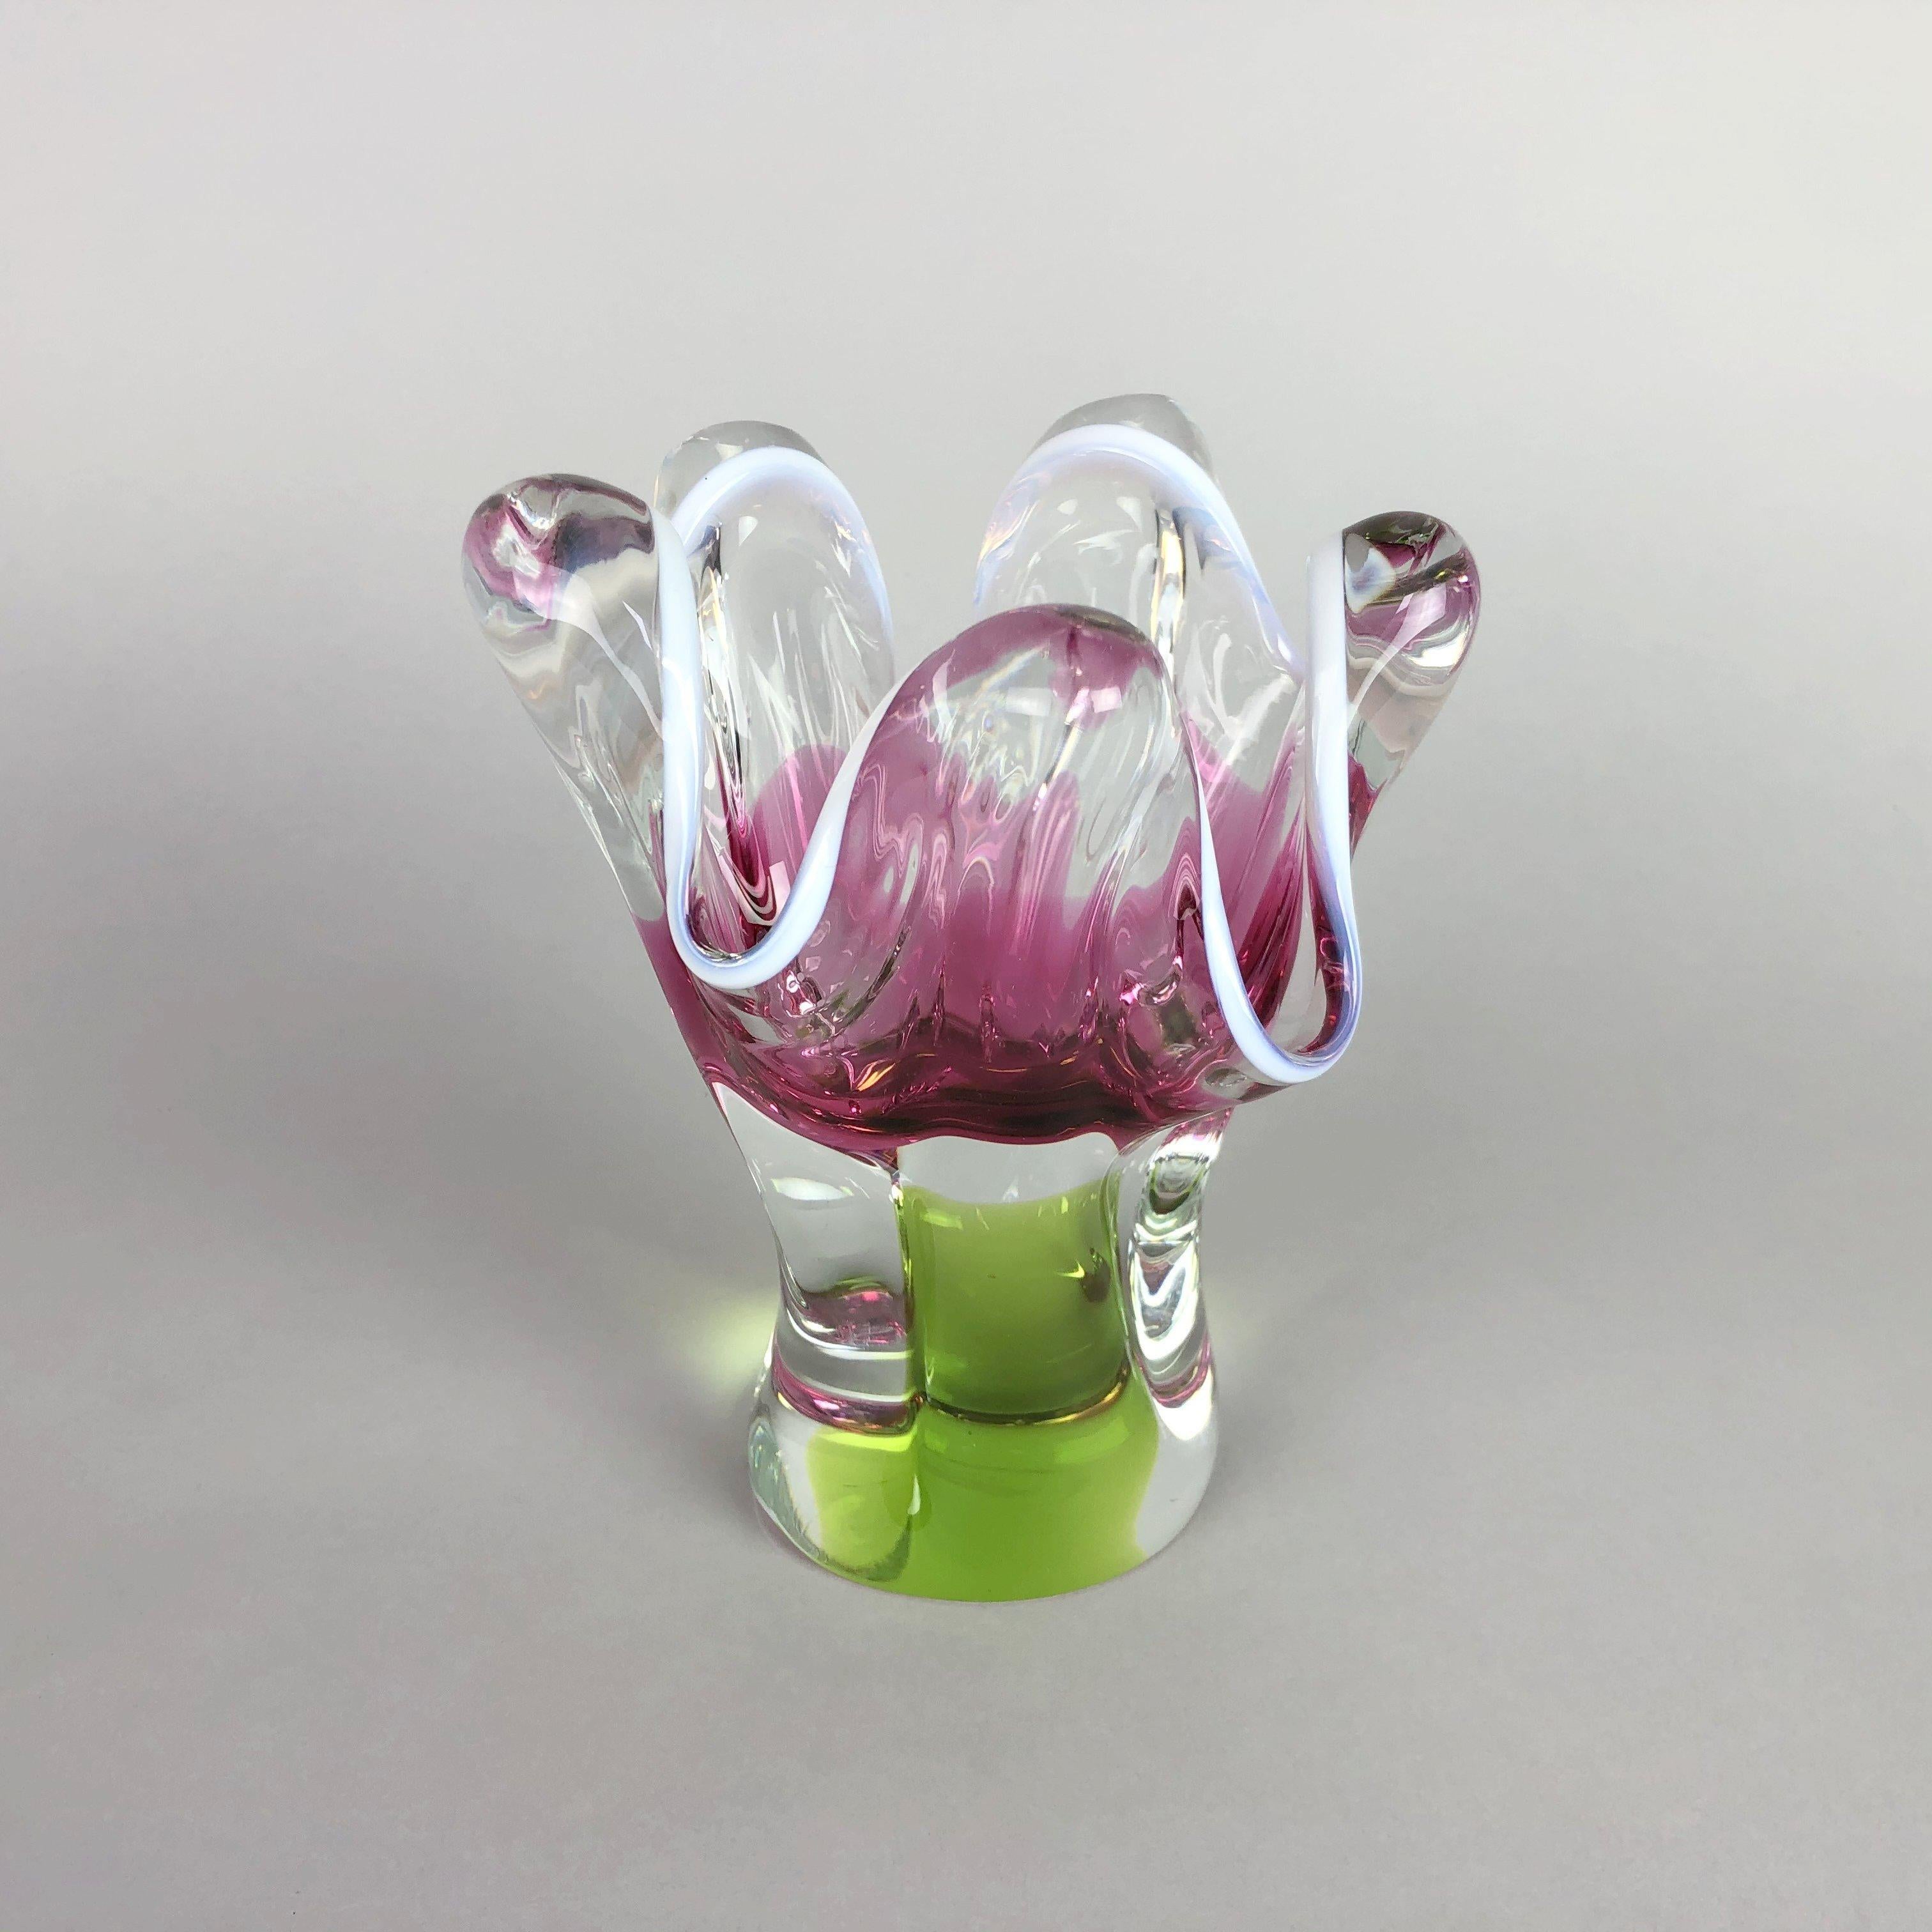 Sculptural Czech art glass vase, designed by Josef Hospodka in 1960s and made by the Chribska glassworks. Combination of pink, green and clear glass with a lovely opaque white rim. Very good vintage condition.